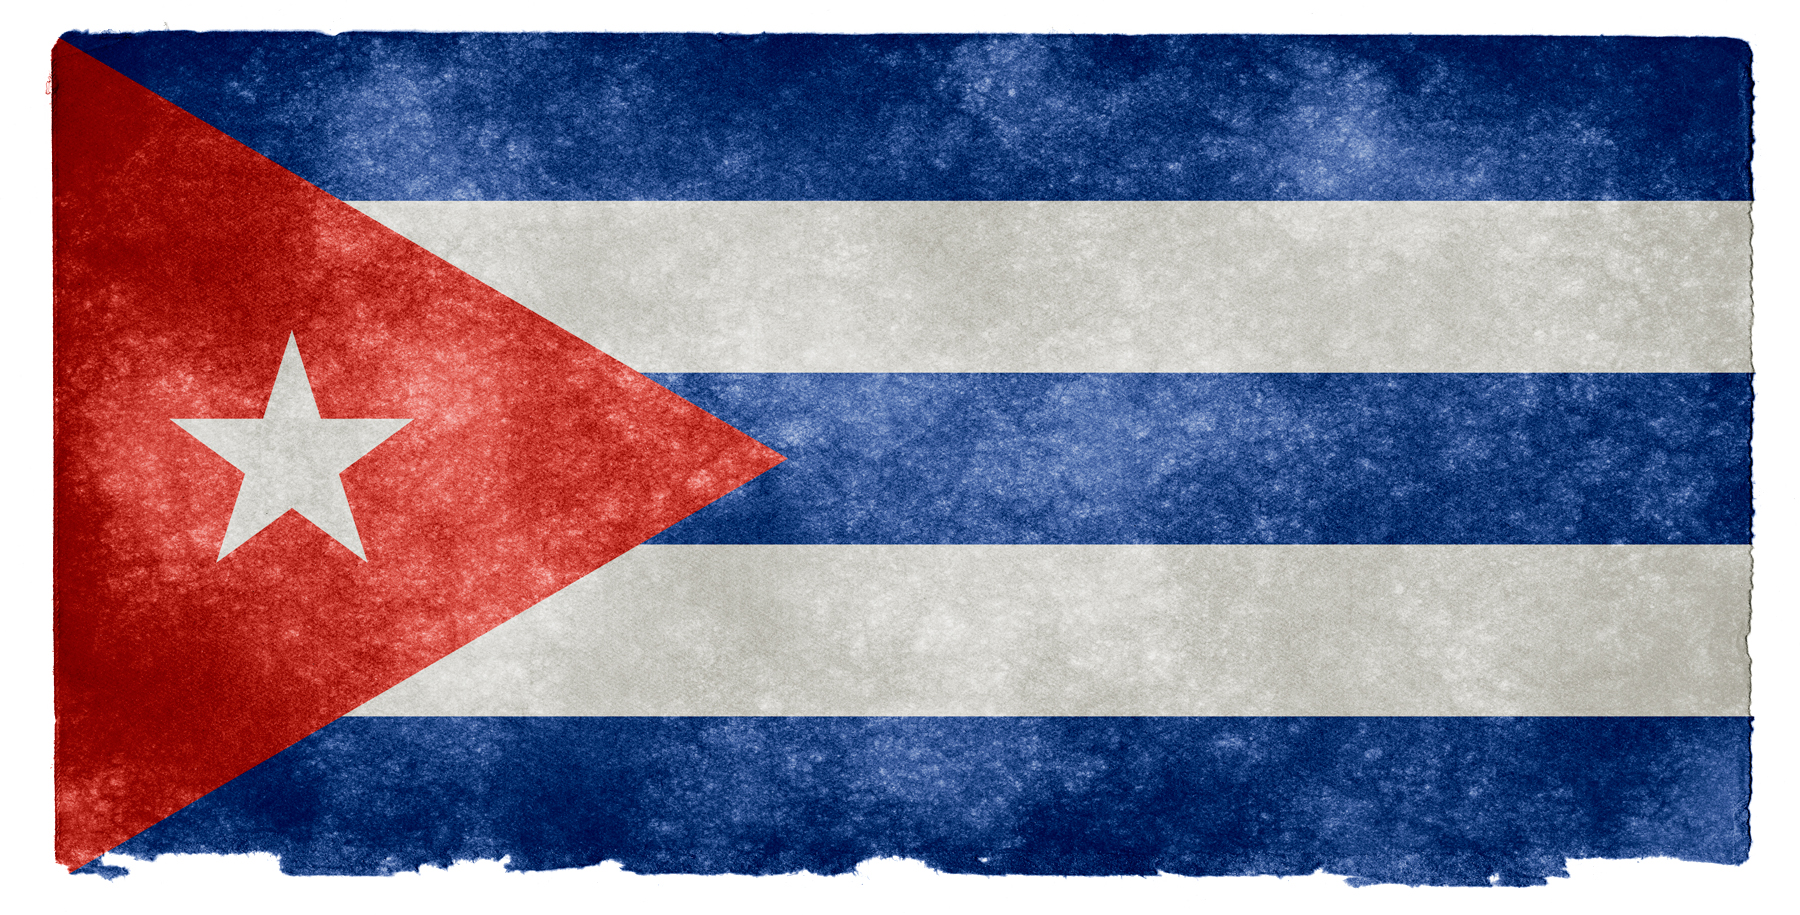 the flag of cuba painted in grunge